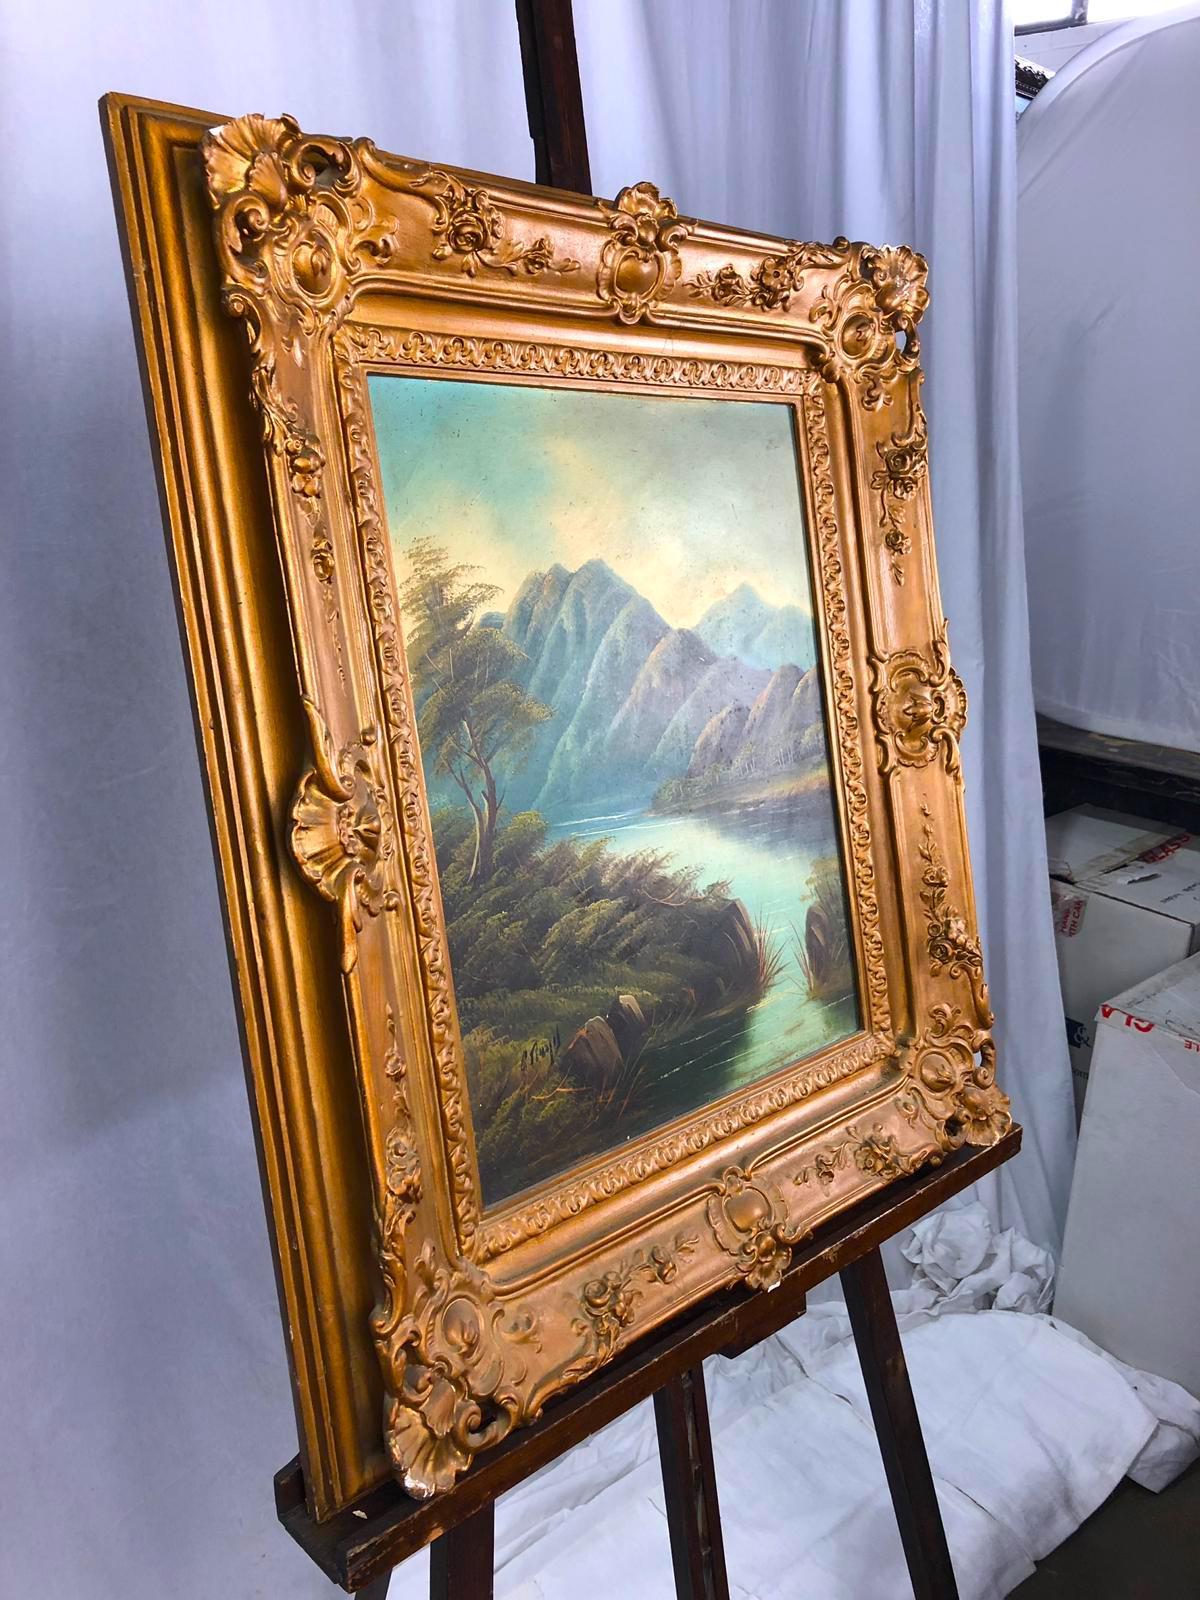 A large 19th century oil painting of the pearl river, with a floral carved gold gild frame. 

Notes on the painting:

The pearl river, also known by its Chinese name Zhujiang and formerly often known as the Canton River, is an extensive river